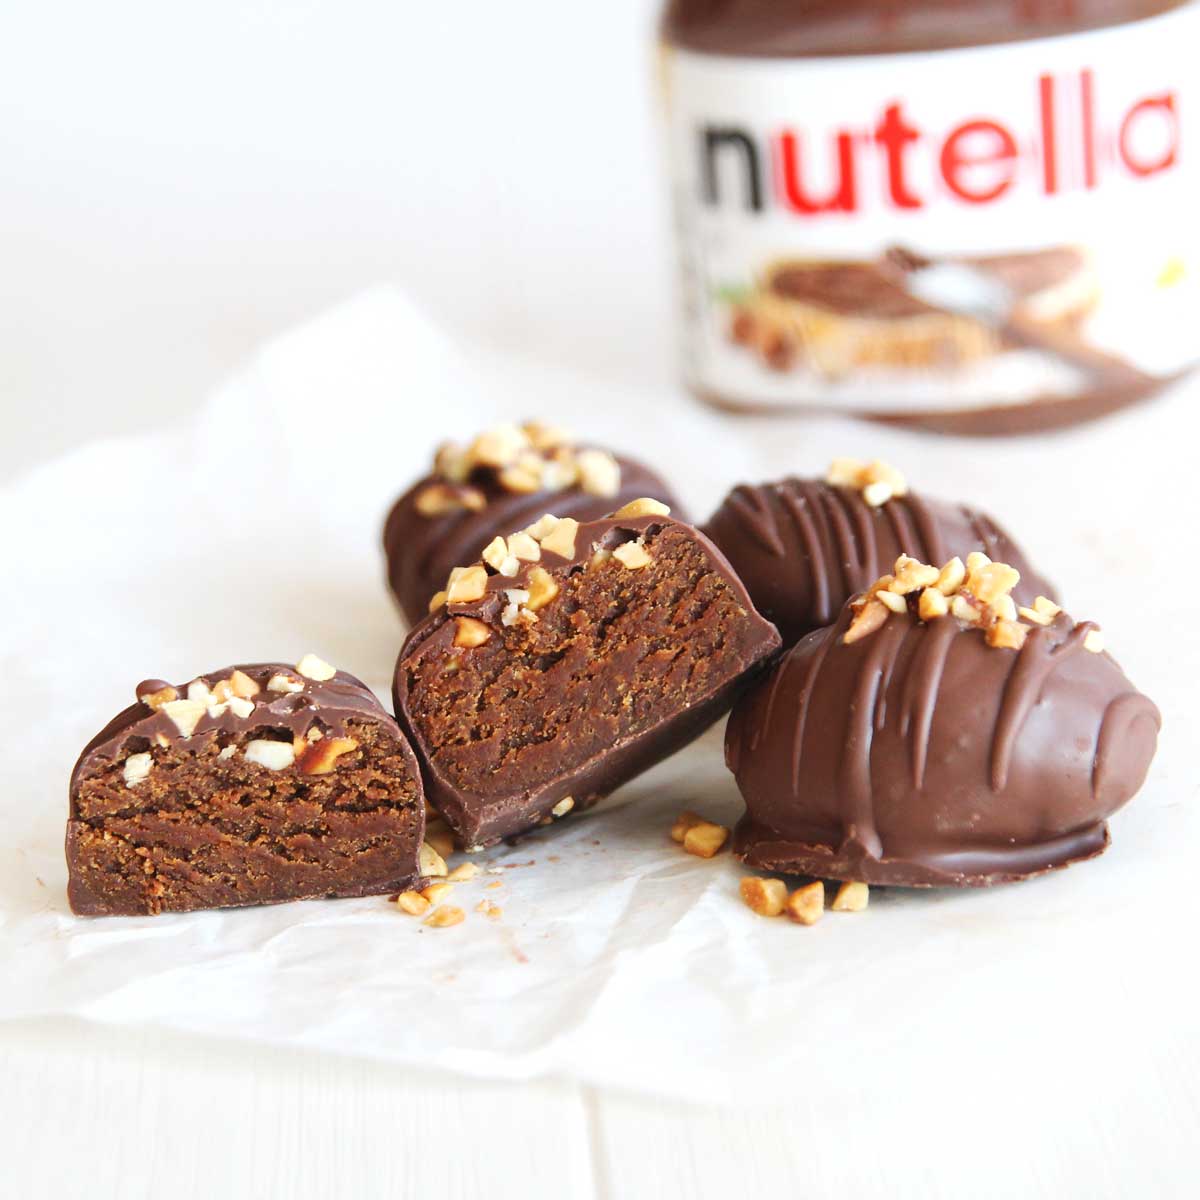 Healthier Nutella Chocolate Easter Eggs Made with PB Powder - Vegan Carrot Cake Scones